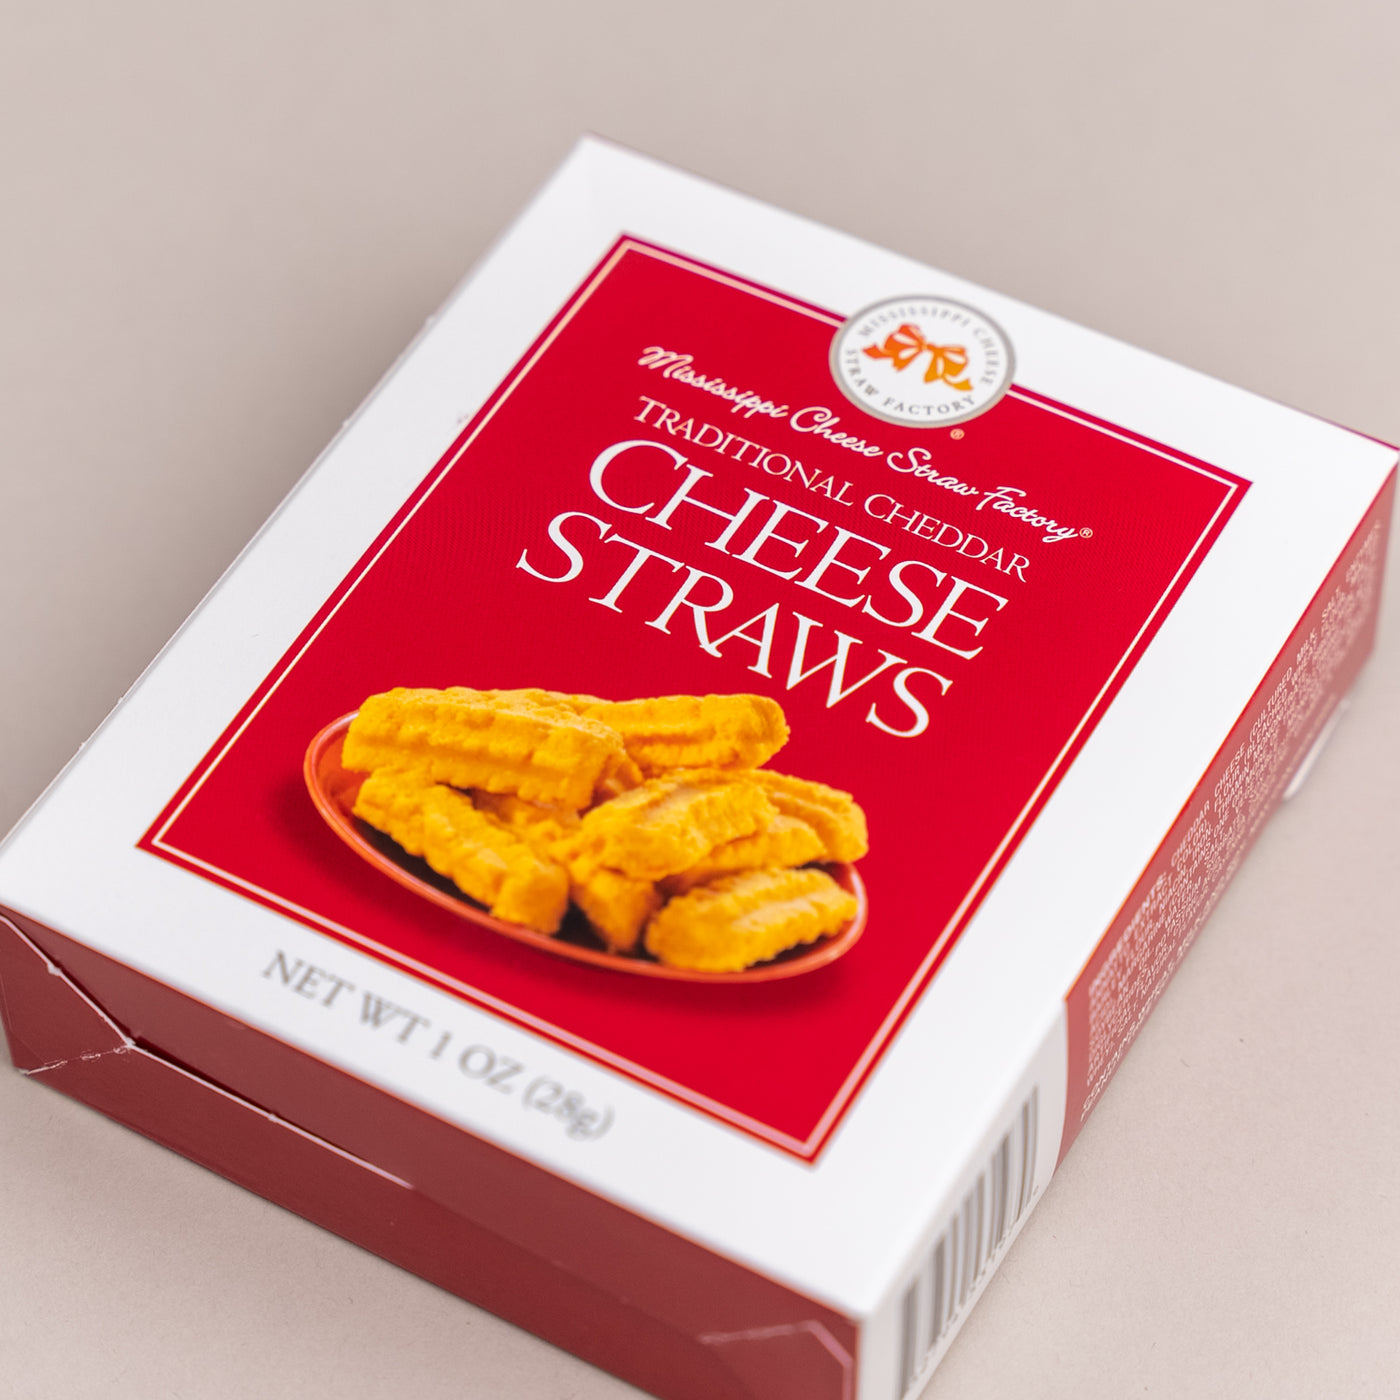 Mississippi Cheese Straw Factory Cheese Straws